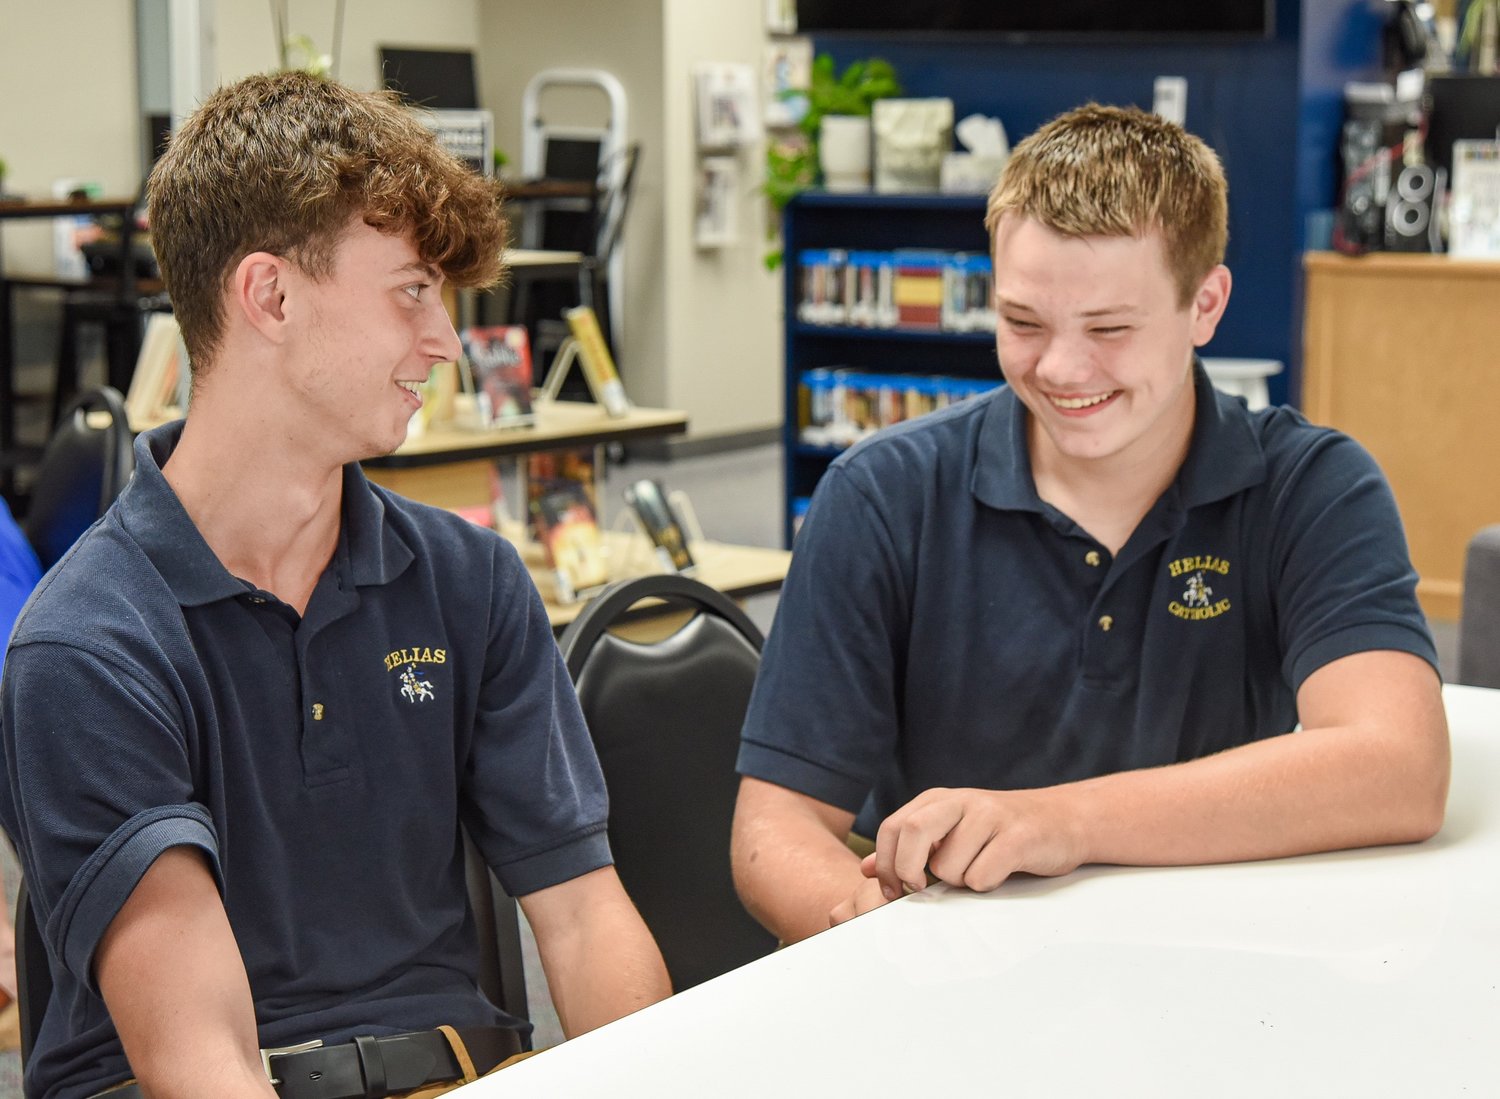 Matteo Chignoli, left, talks about spending a week at Helias Catholic High School and visiting Missouri during an interview Aug. 24 in the library at Helias Catholic. Chignoli is from Italy and attends the Whitney English Academy in Spain but was in Missouri for about two weeks to sample American culture.